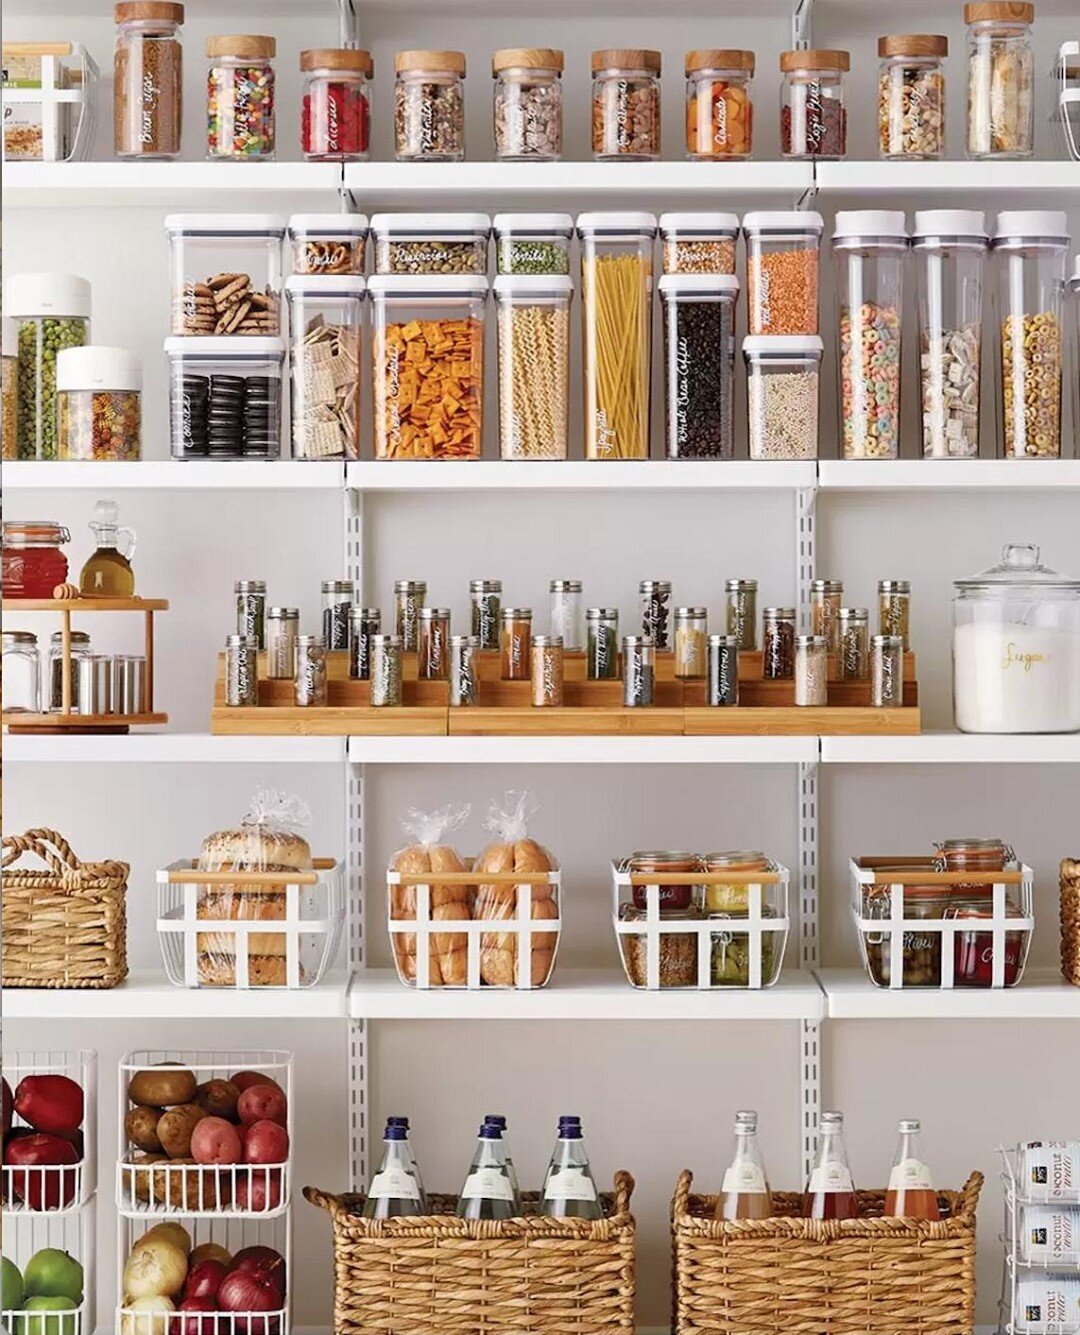 Did you know that by using canisters instead of foods&rsquo; original packaging, not only will you maximize your space, but it can help you extend your foods shelf life? ⁠
⁠
pic: @thecontainerstore⁠
#therealm #kimberlystewart #fromcluttertoclarity #p